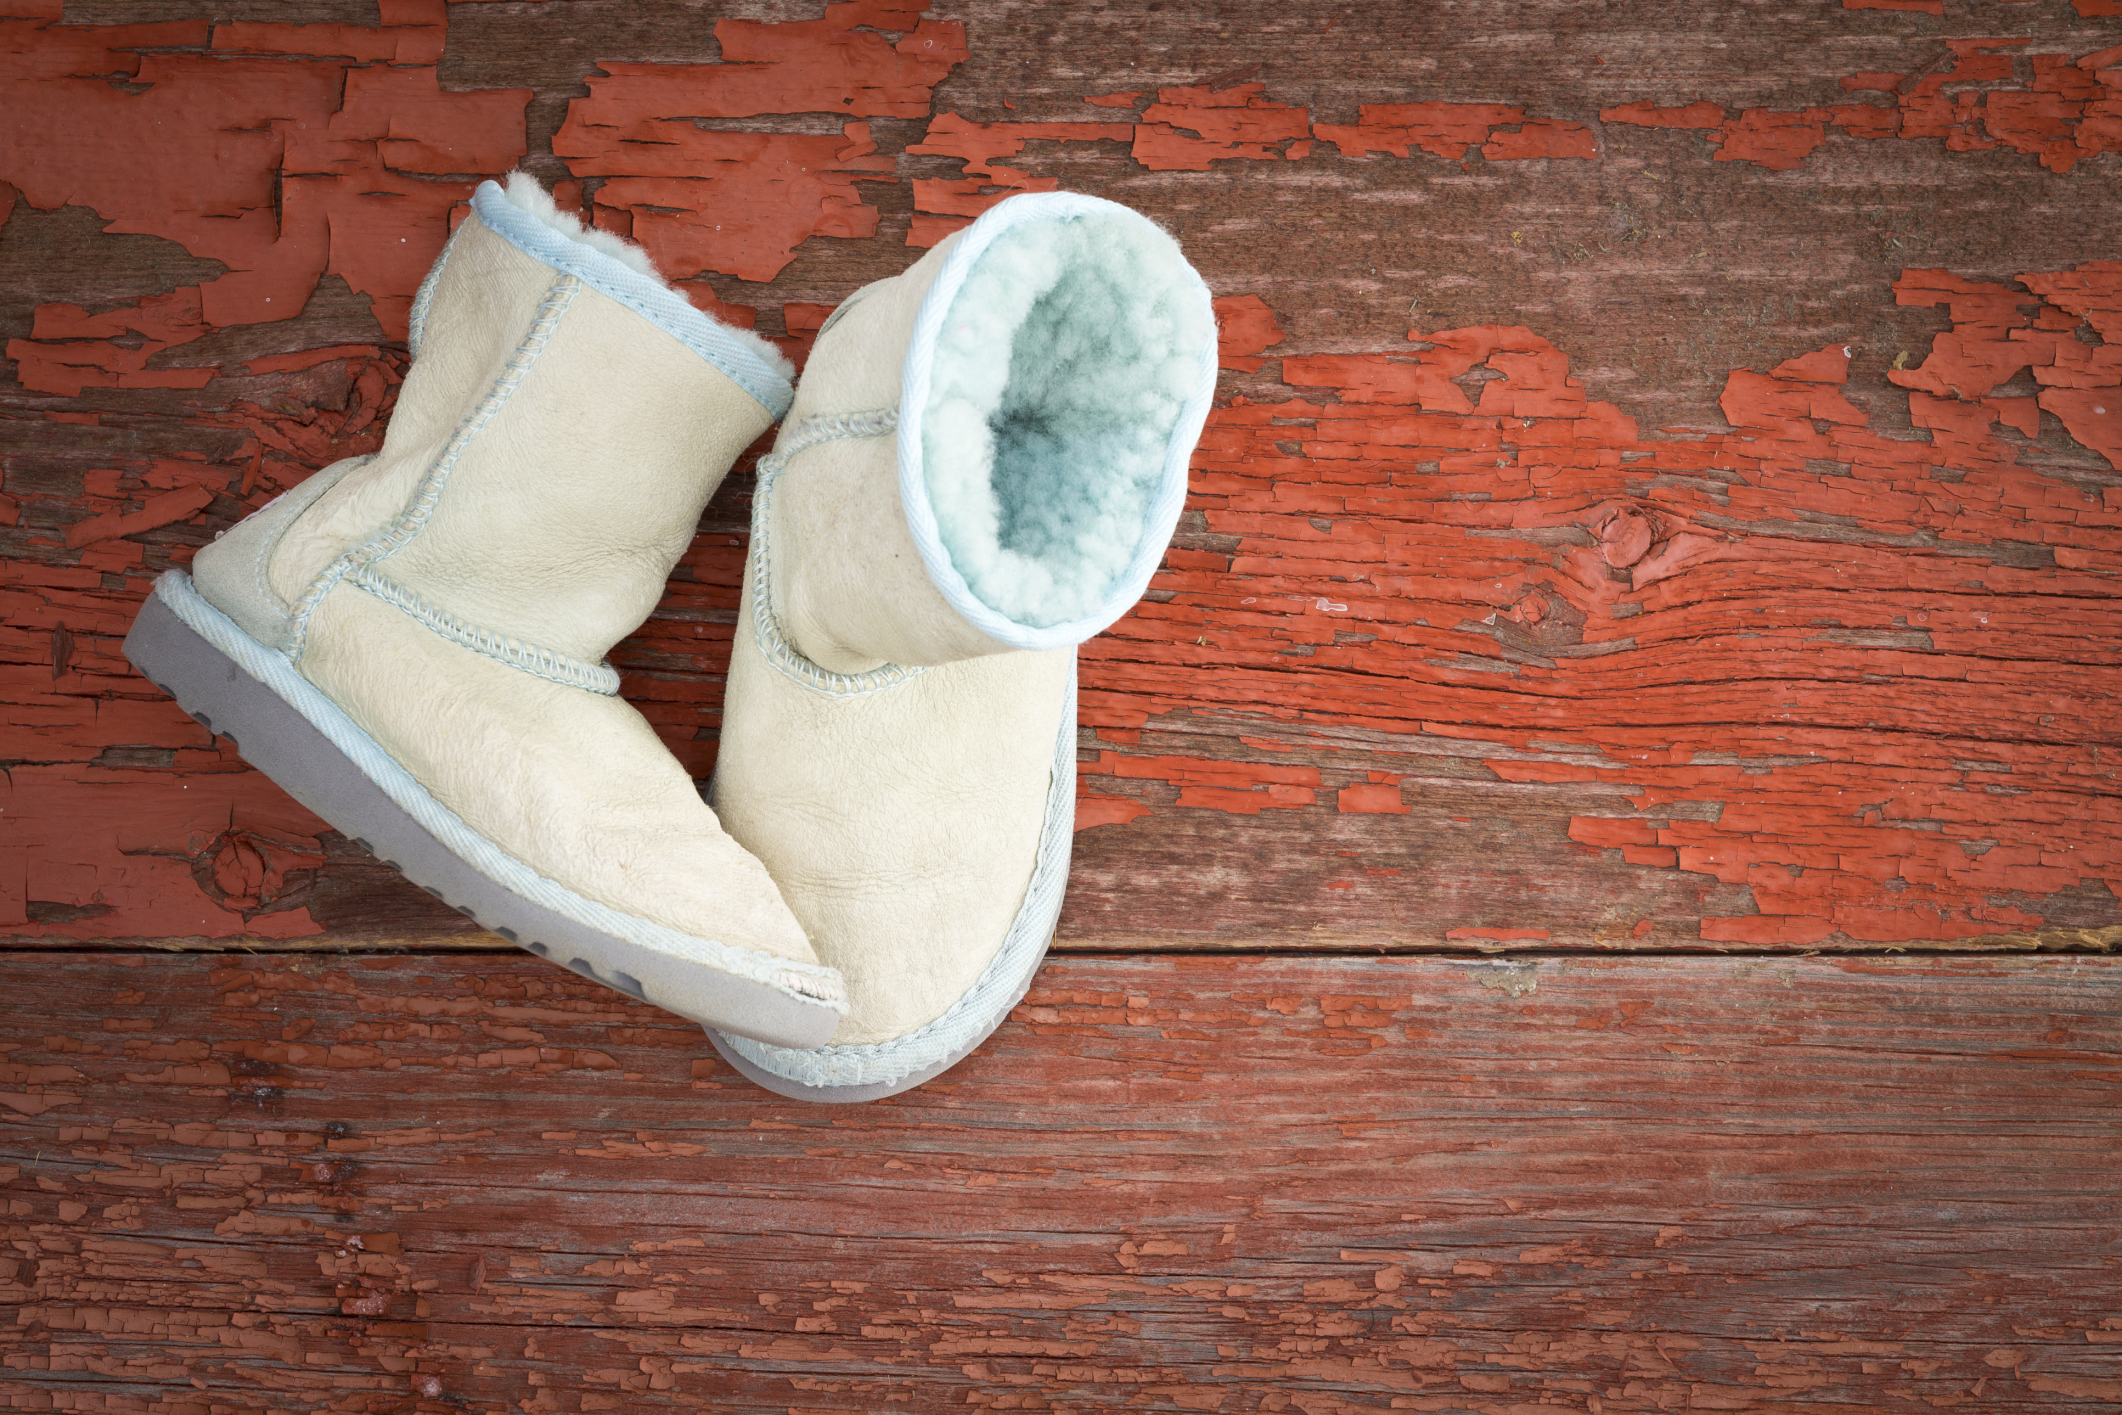 How to Clean Sheepskin Slippers | ehow